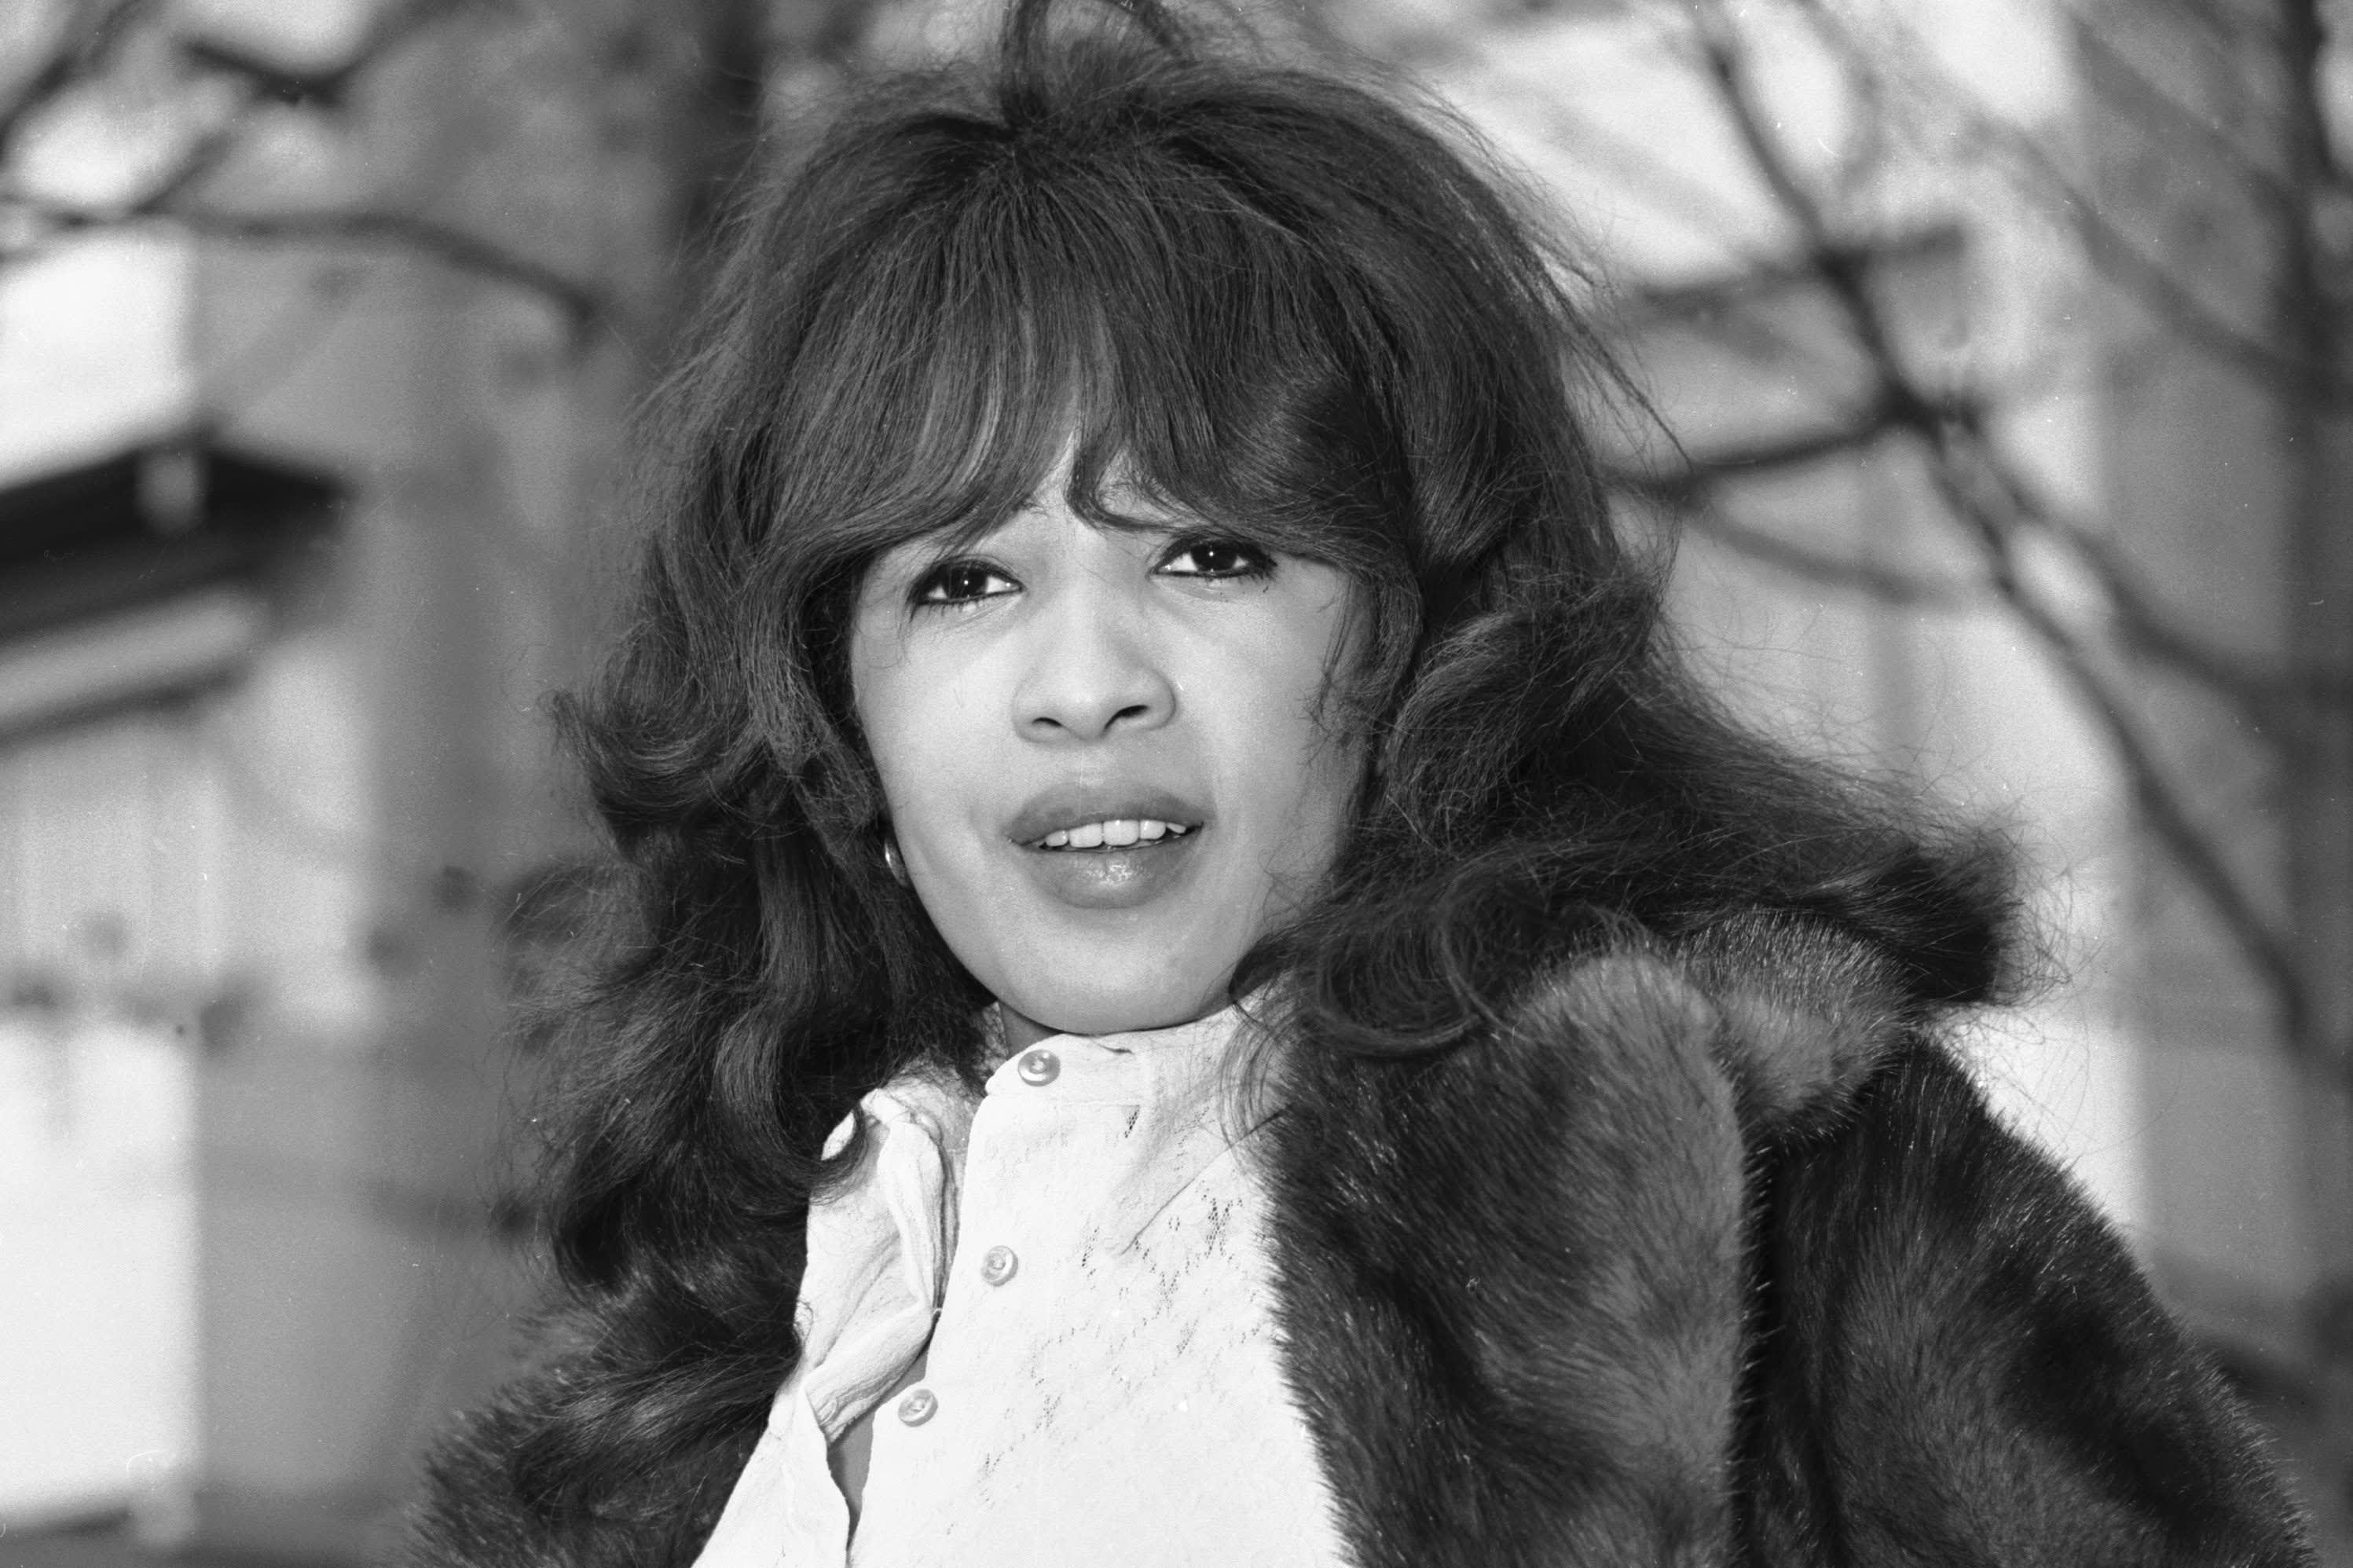 Ronnie Spector, ’60s Pop Music Icon and Member of the Ronettes, Dies at 78